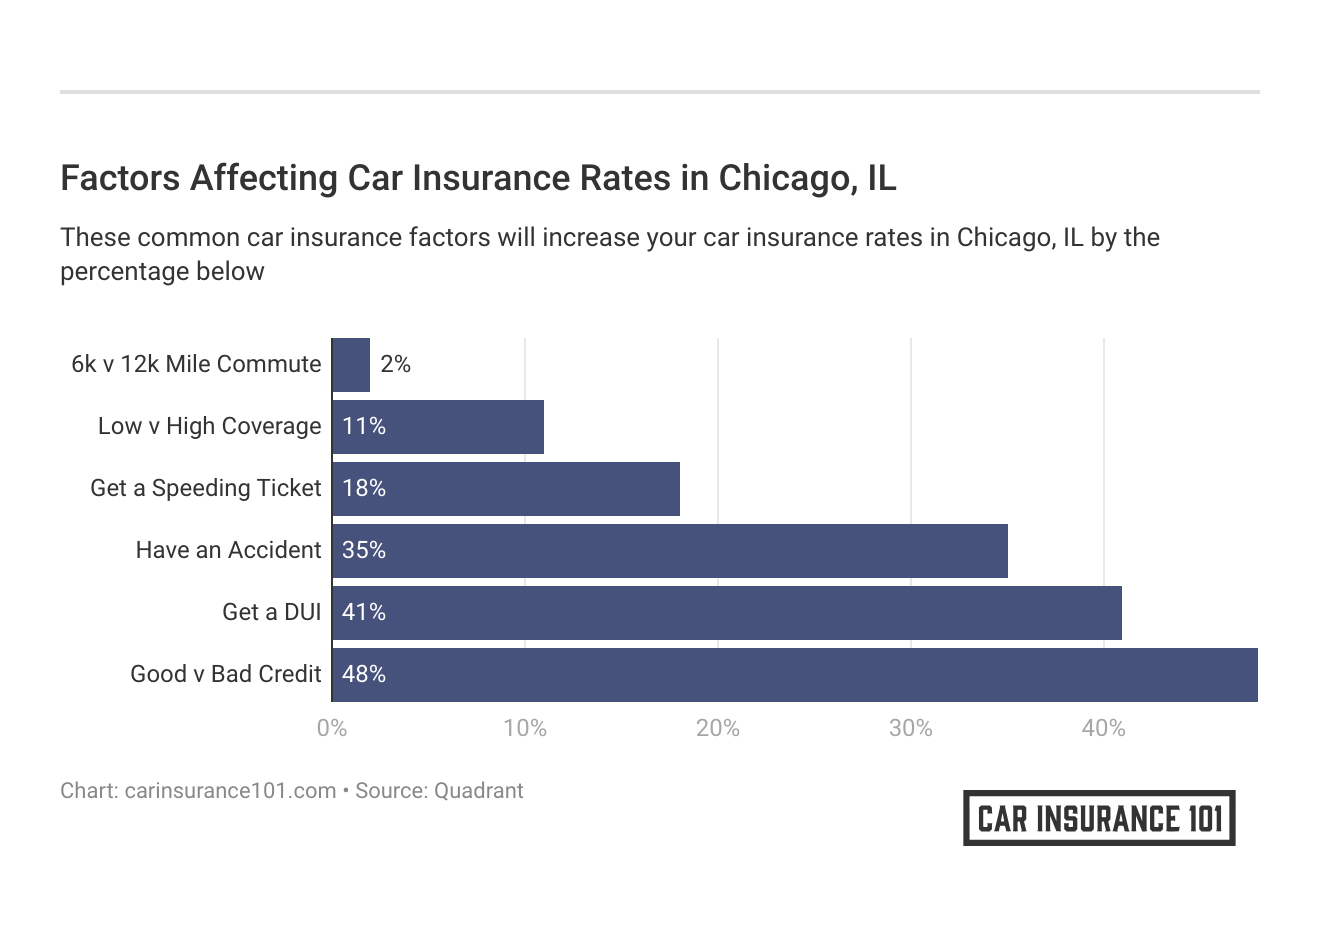 <h3>Factors Affecting Car Insurance Rates in Chicago, IL</h3>